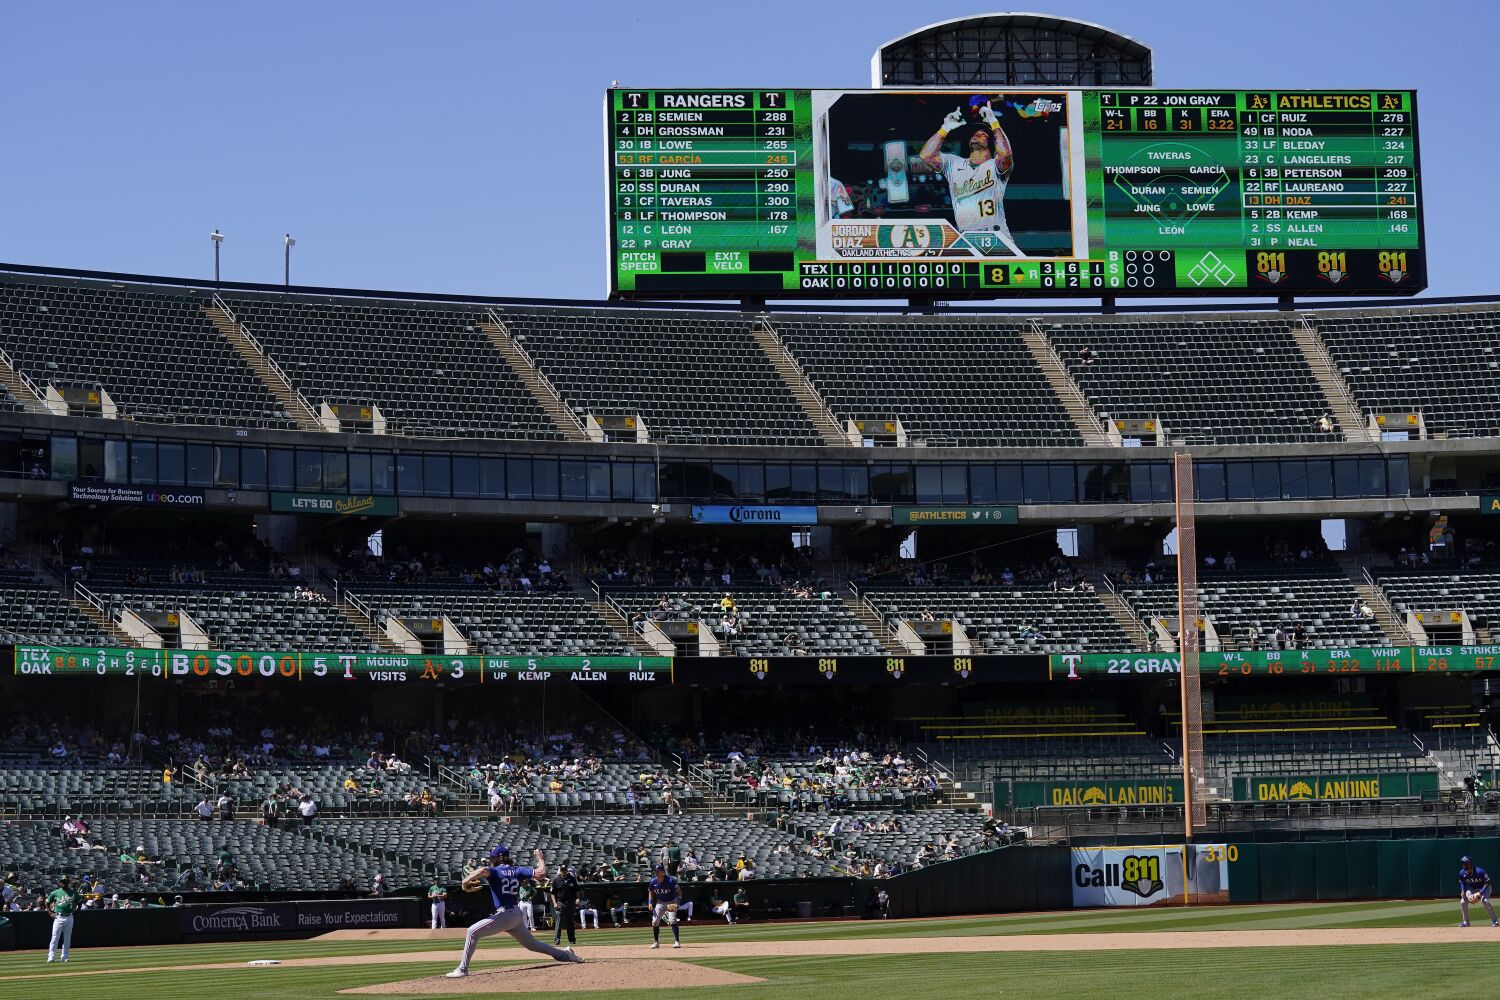 Can the A's really draw 2.5 million people in Las Vegas?